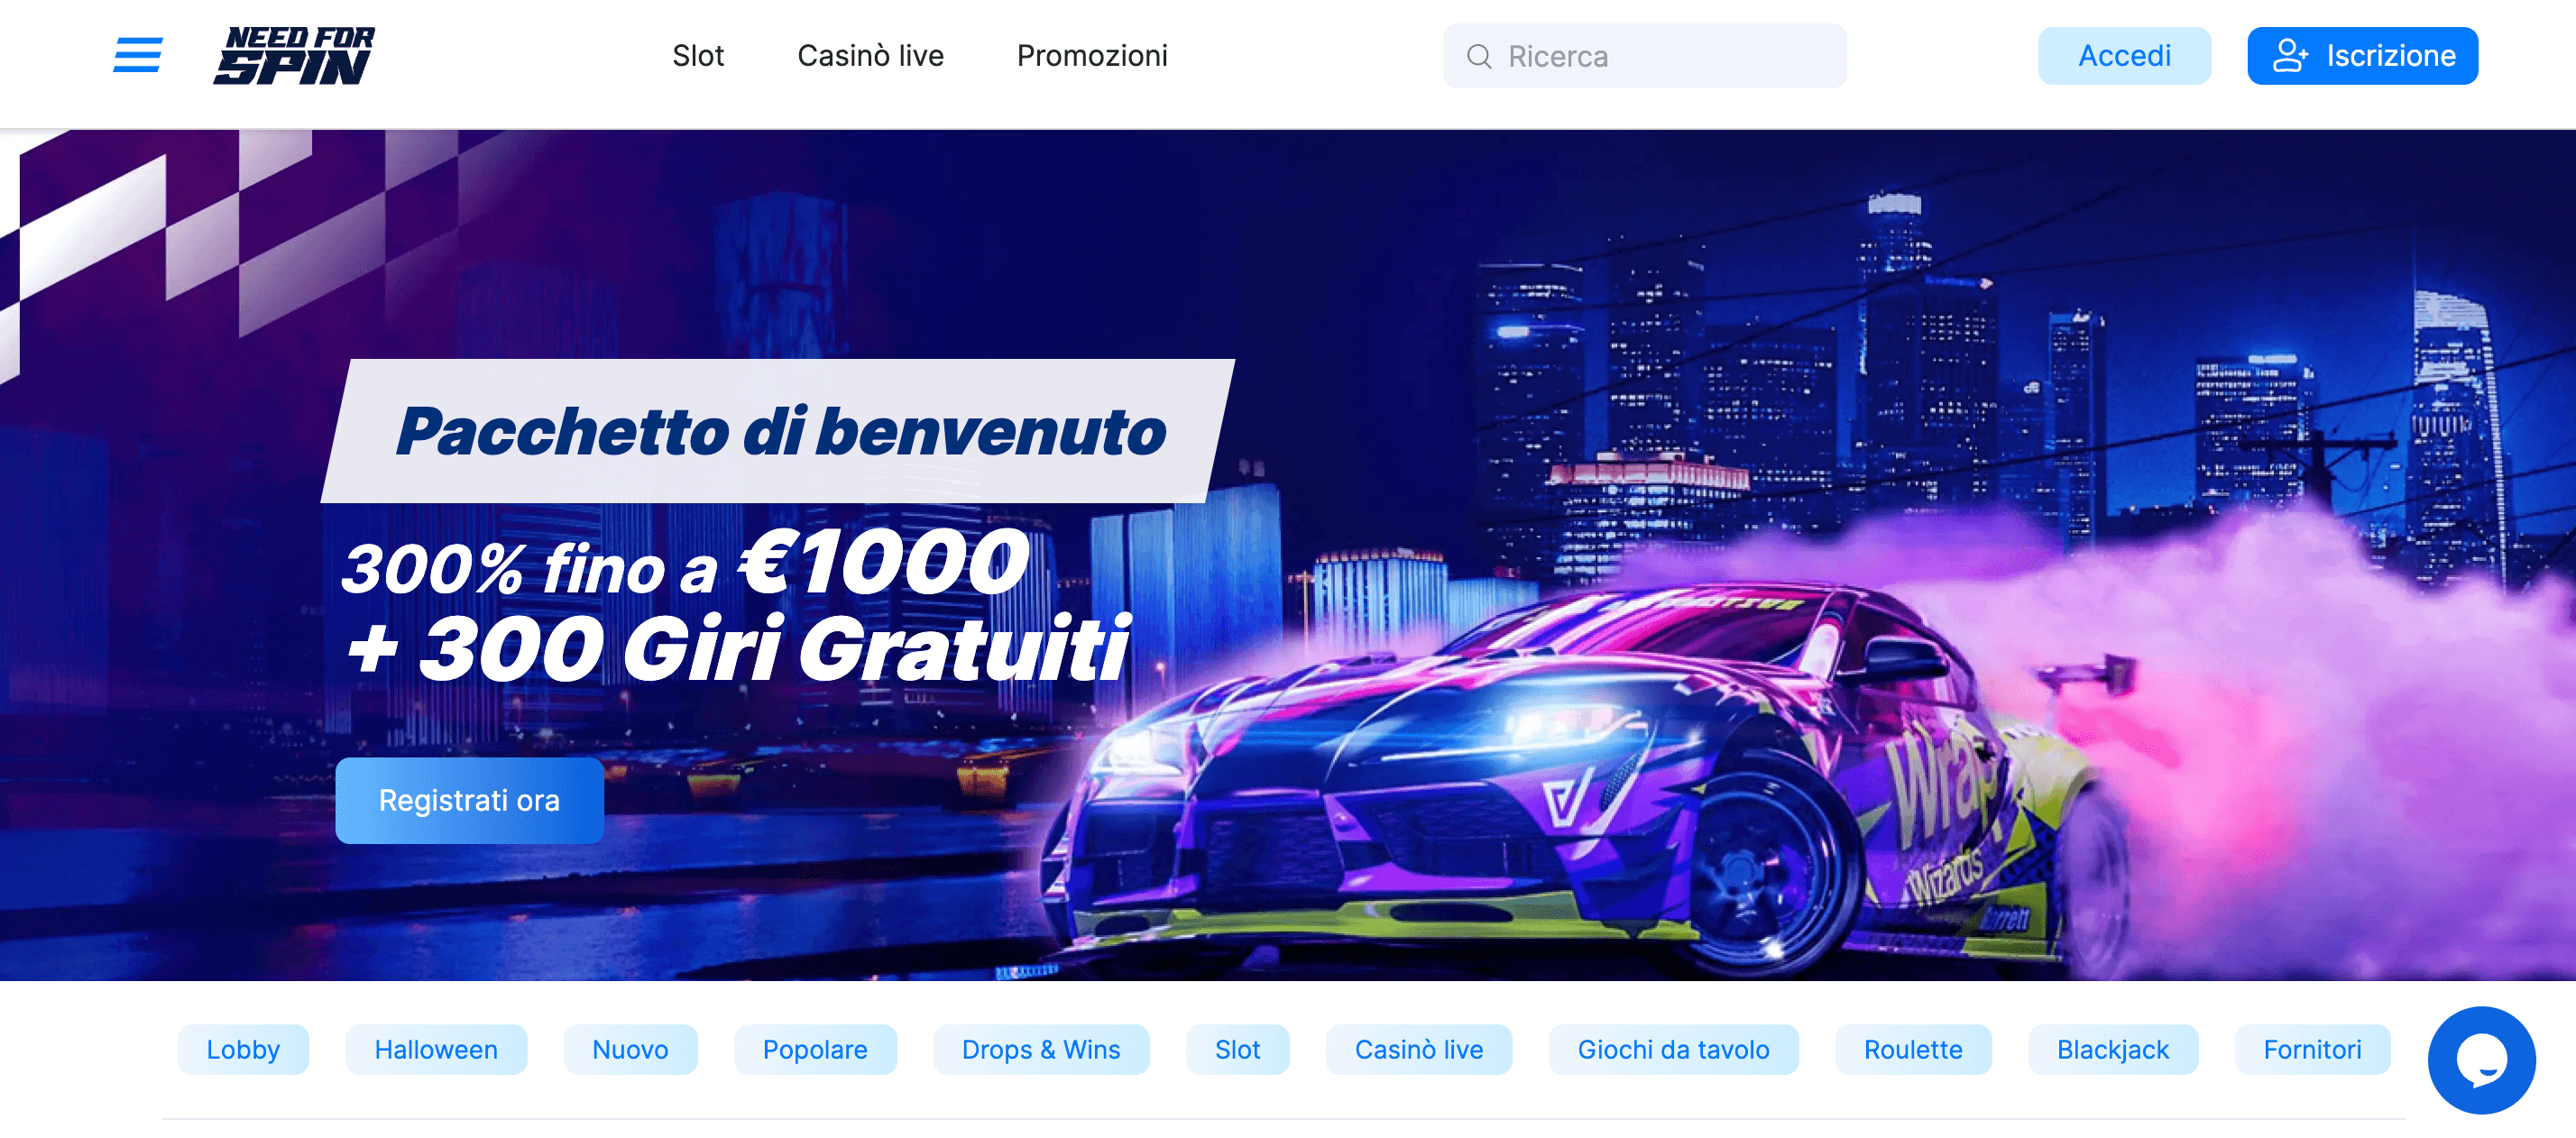 Need For Spin Casino e Scommesse Screenshot